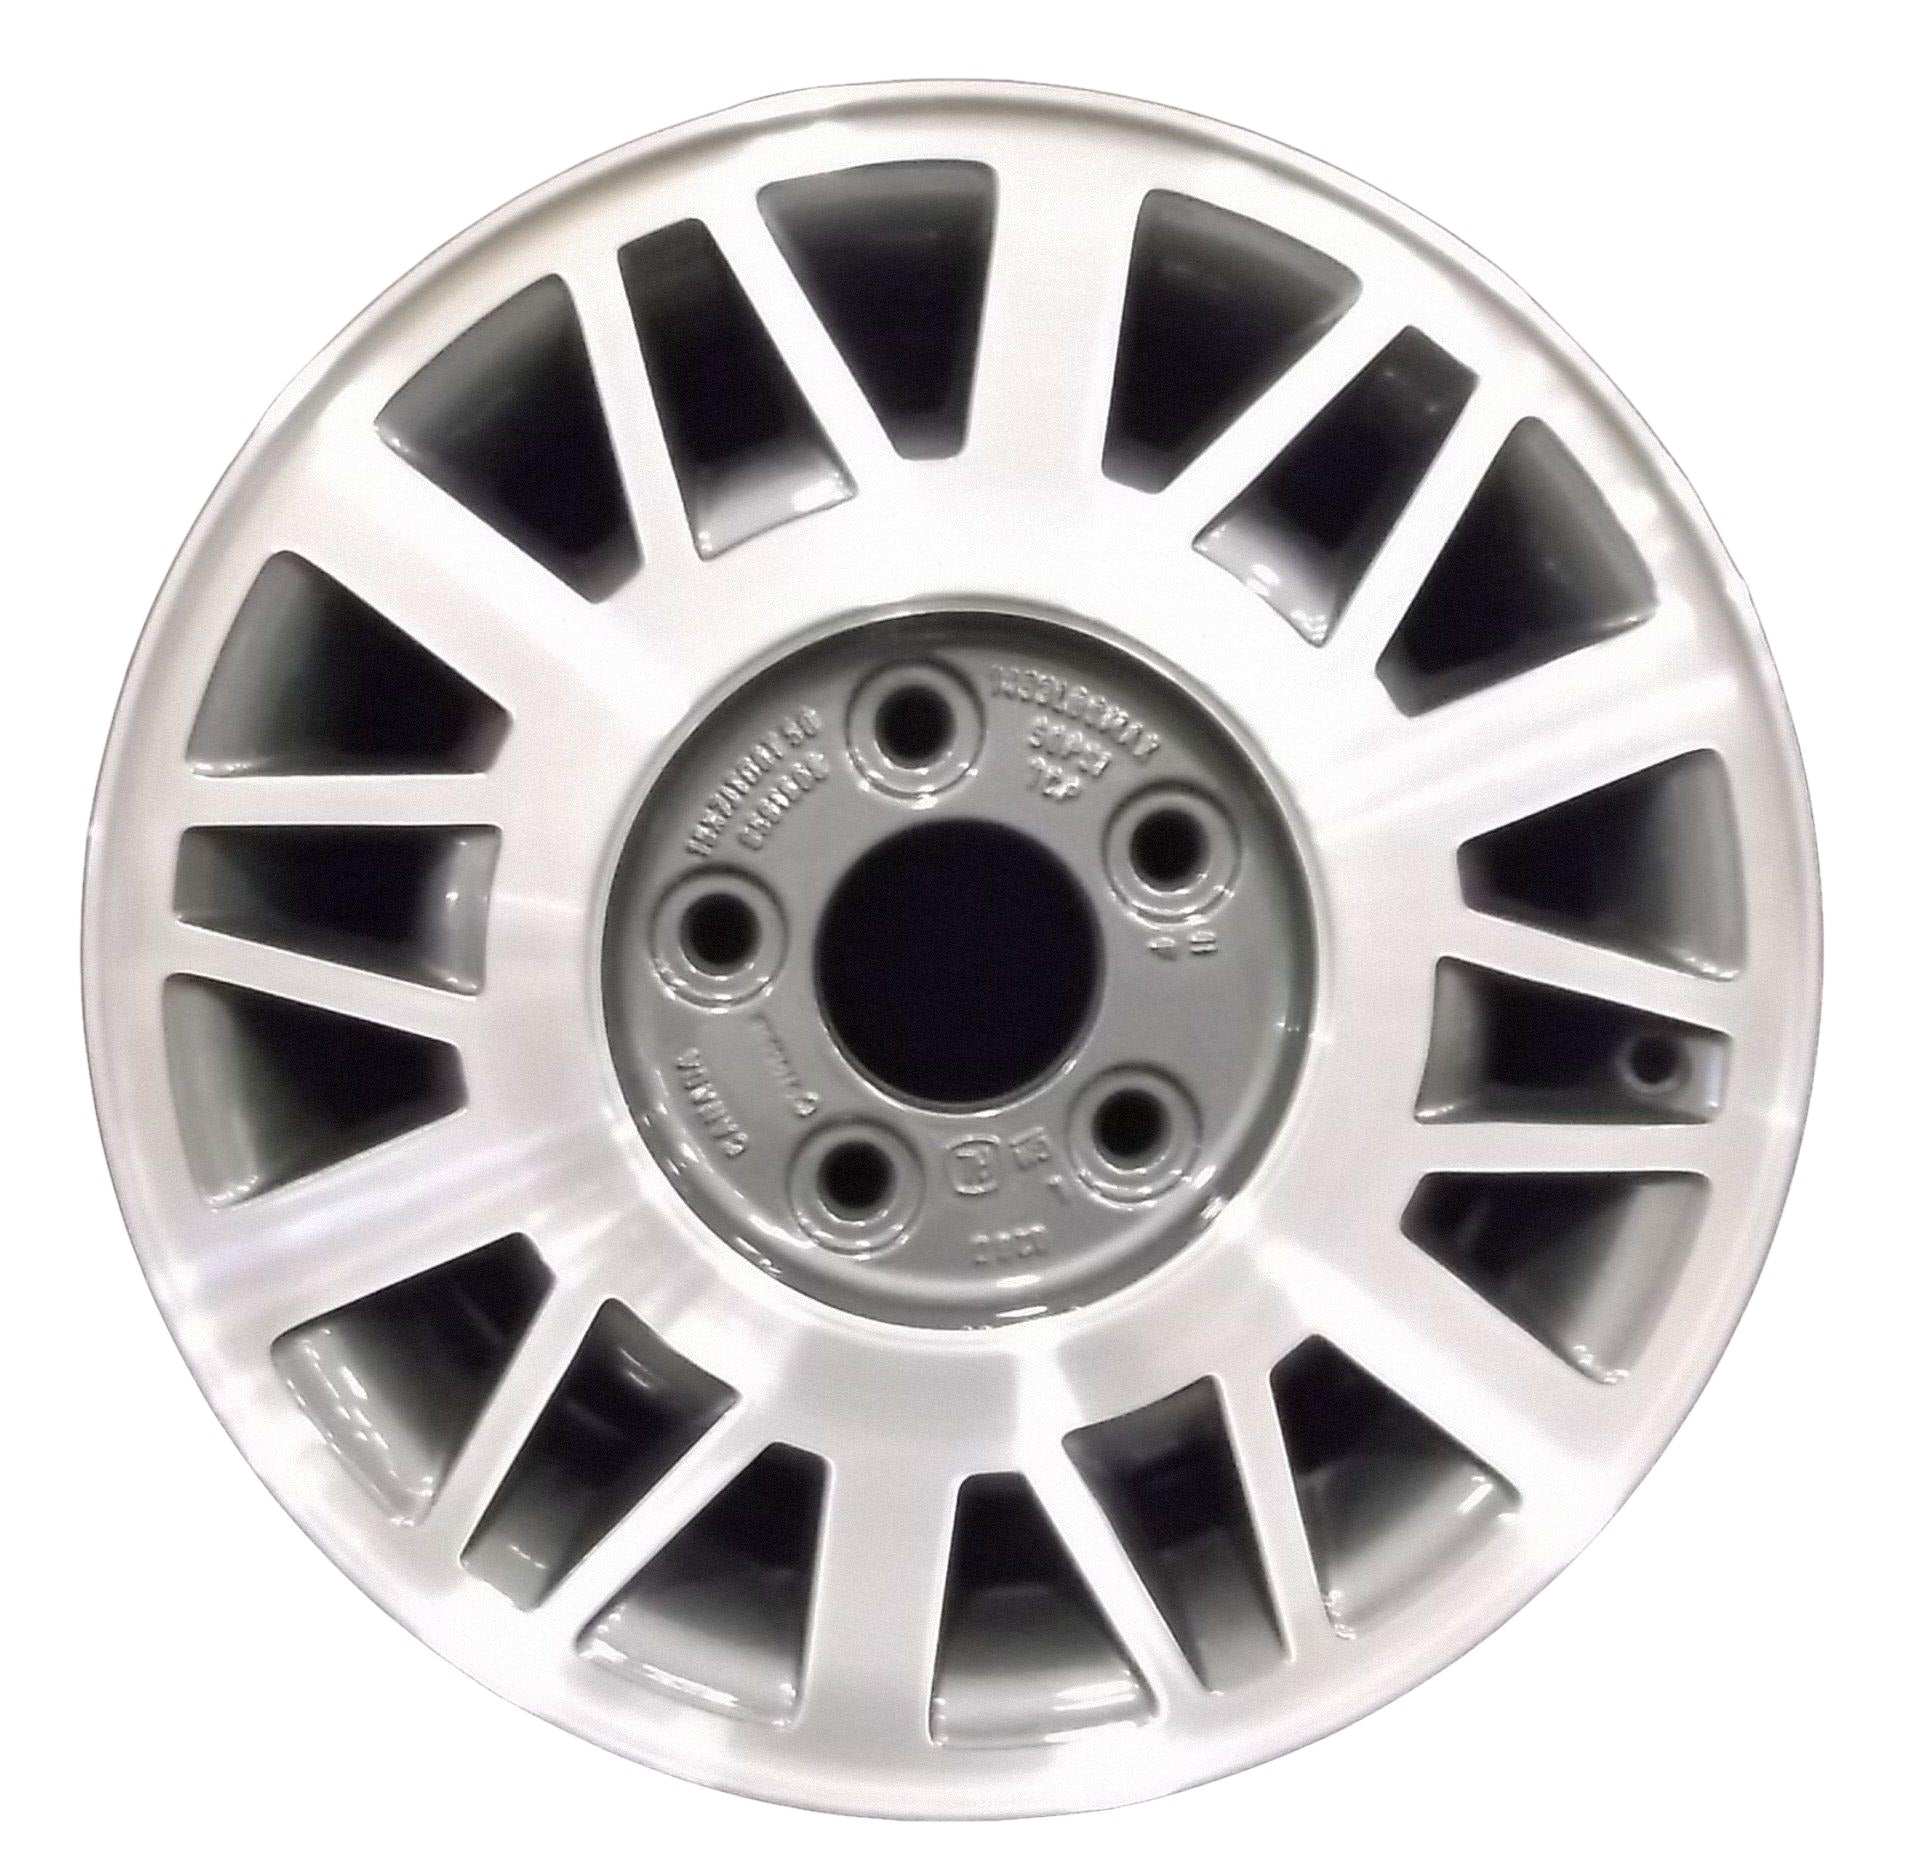 Chevrolet S10 Truck  1995, 1996, 1997, 1998, 1999, 2000, 2001 Factory OEM Car Wheel Size 15x7 Alloy WAO.5044.LC26.MA